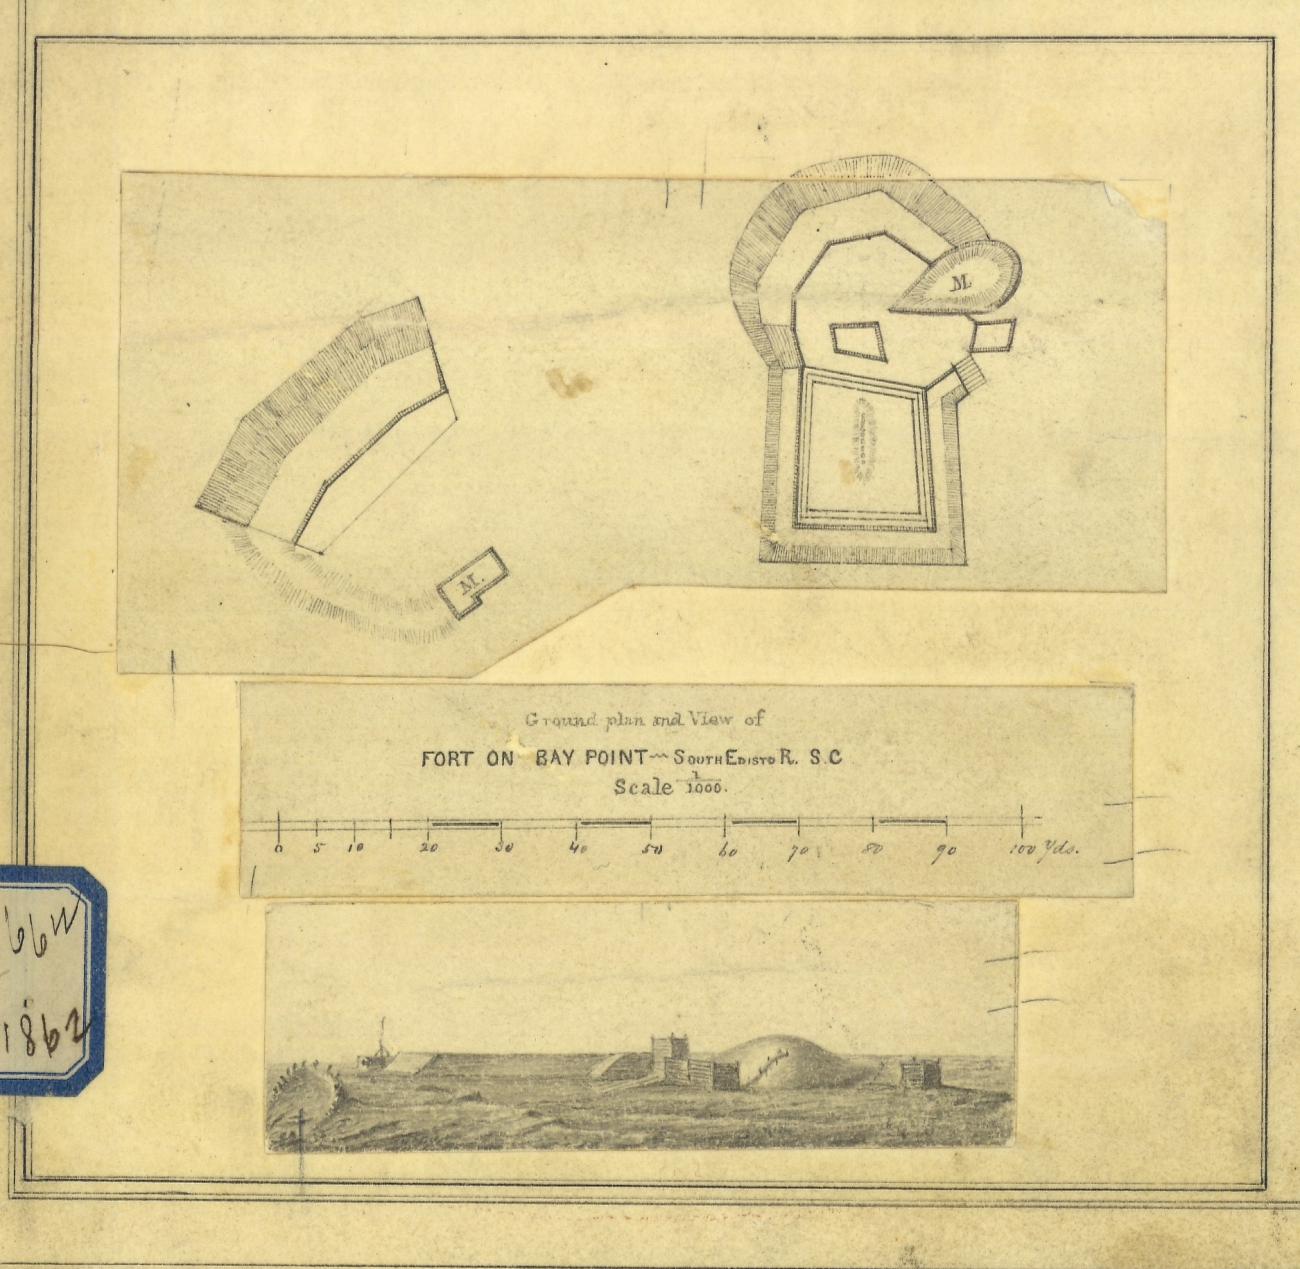 Blowup ground plan and view of Fort on Bay Point - South Edison River, S